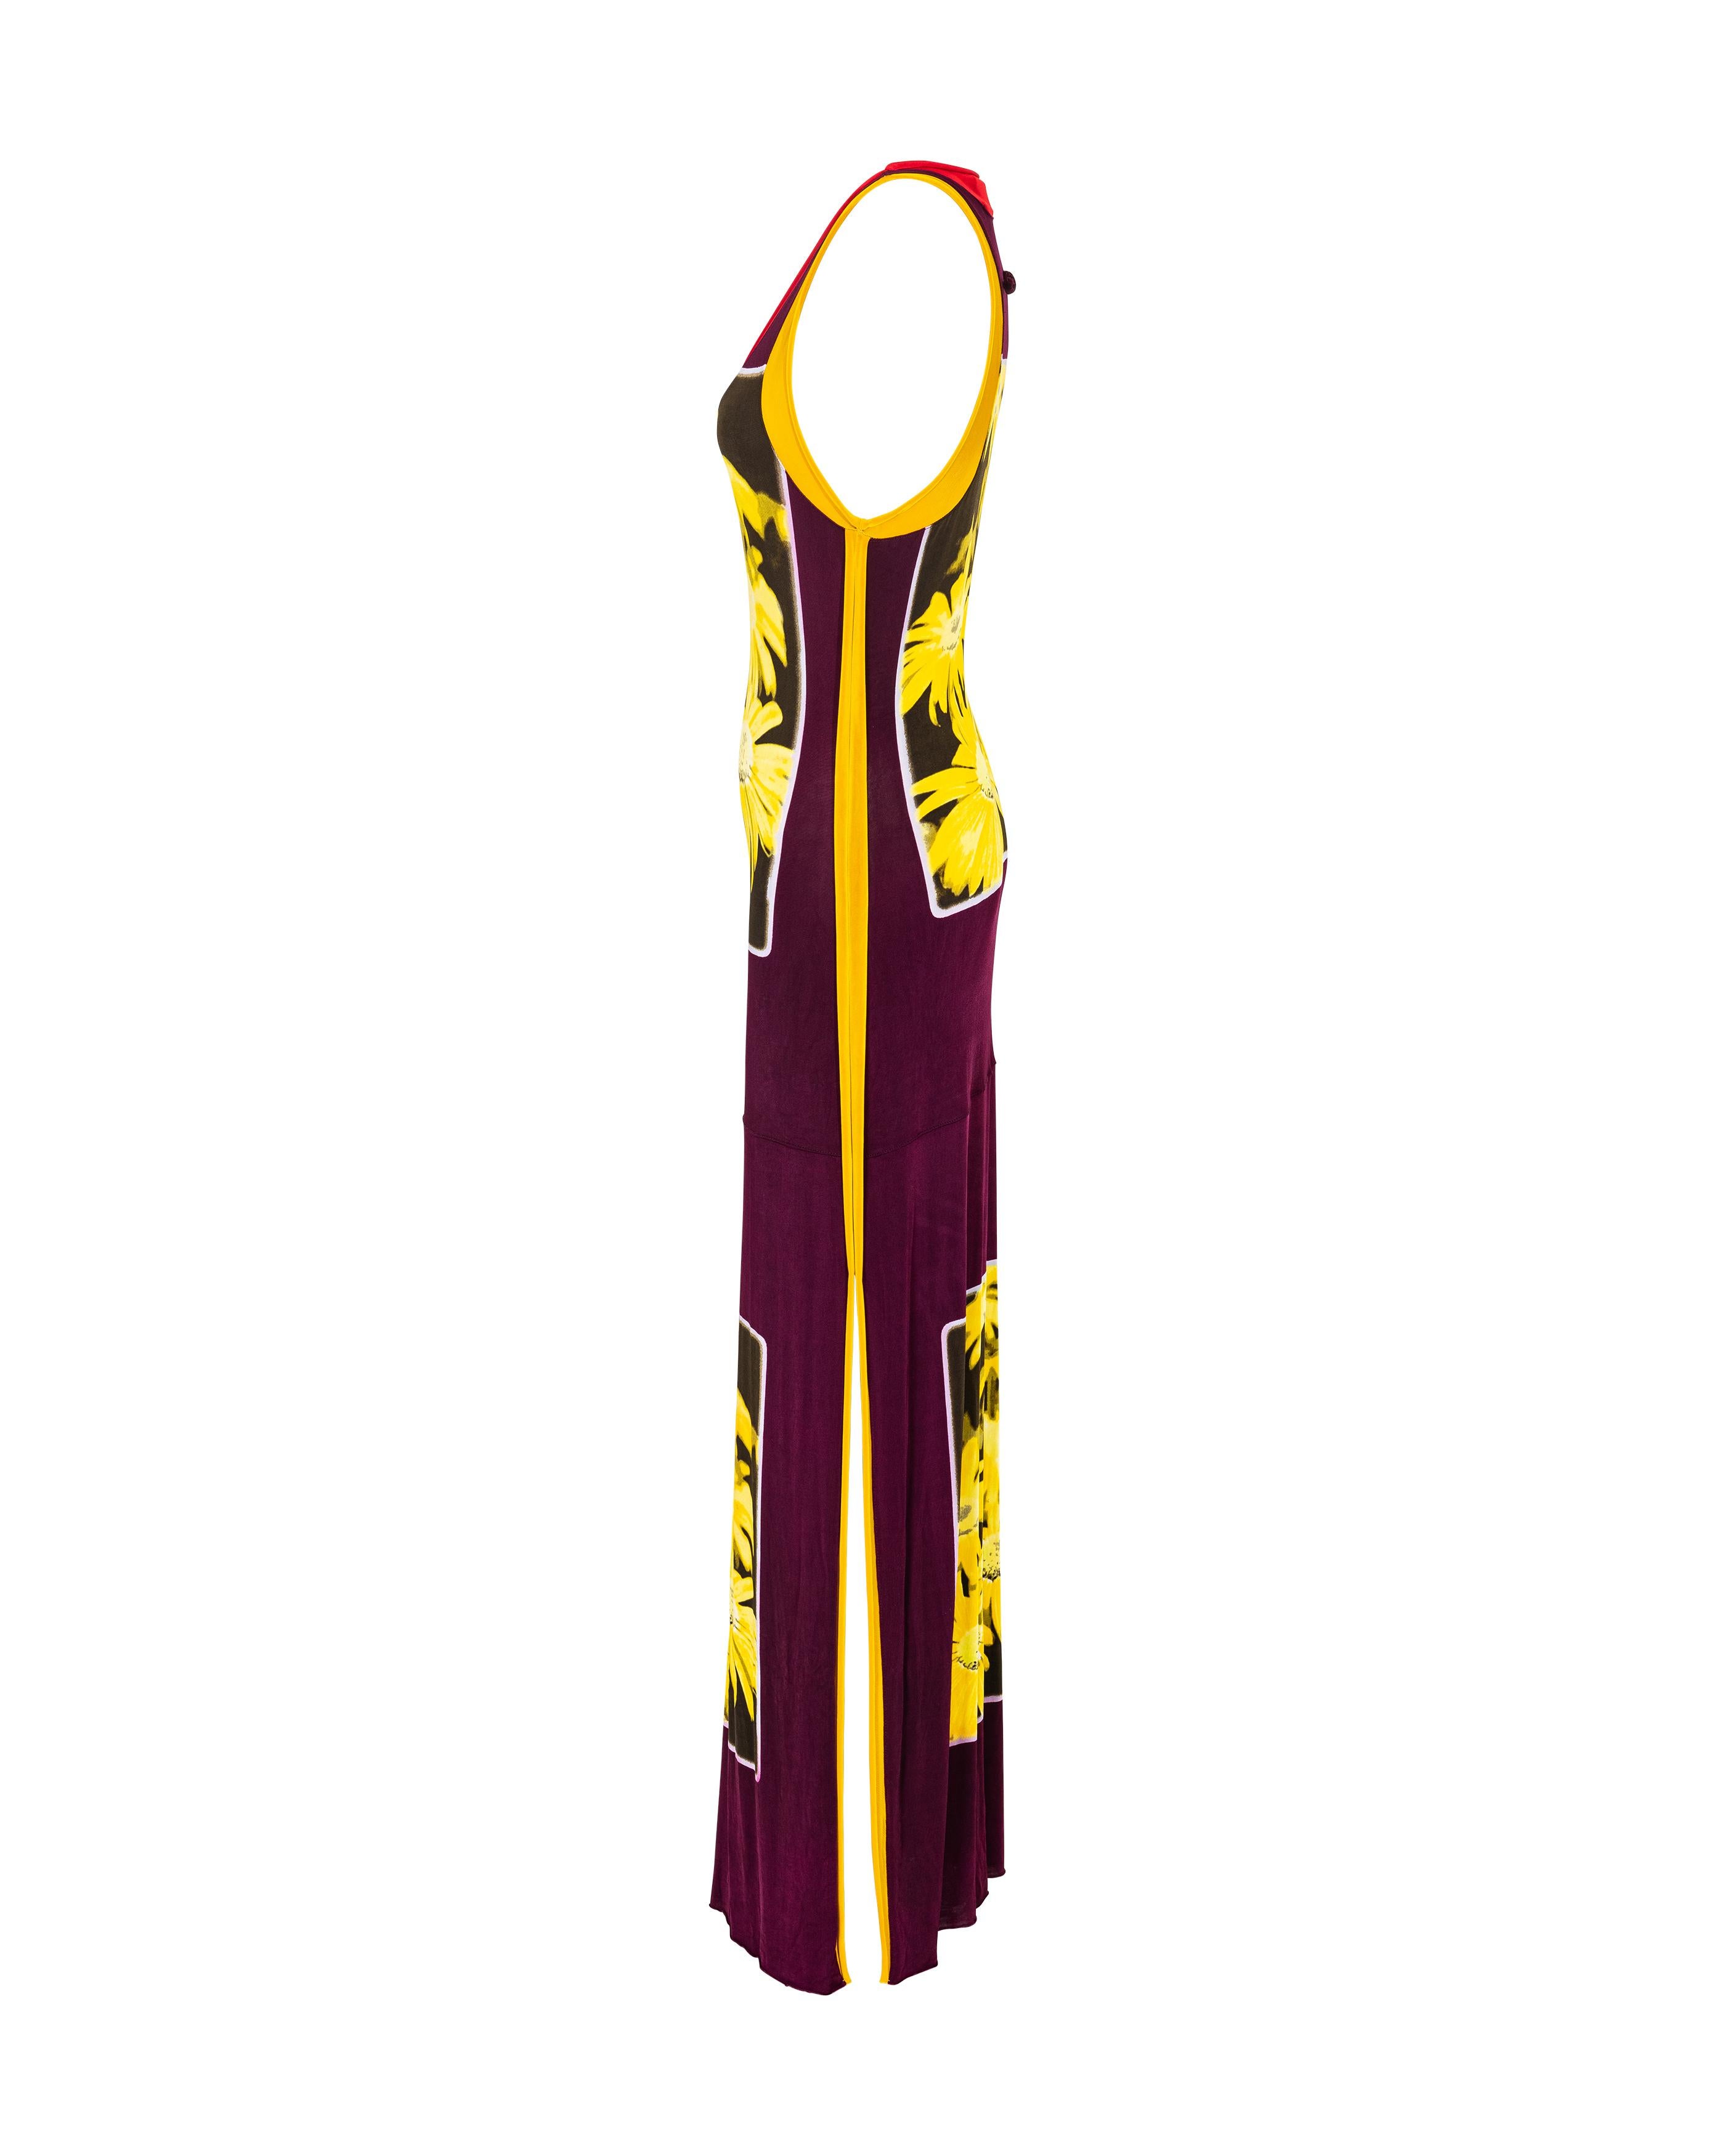 1990's Jean Paul Gaultier scoop neck floral print jersey maxi dress. Sleeveless warm purple dress with yellow floral print and red and yellow contrast trim creating sport-inspired motif. Features side slits at both sides and raw cut hem, with